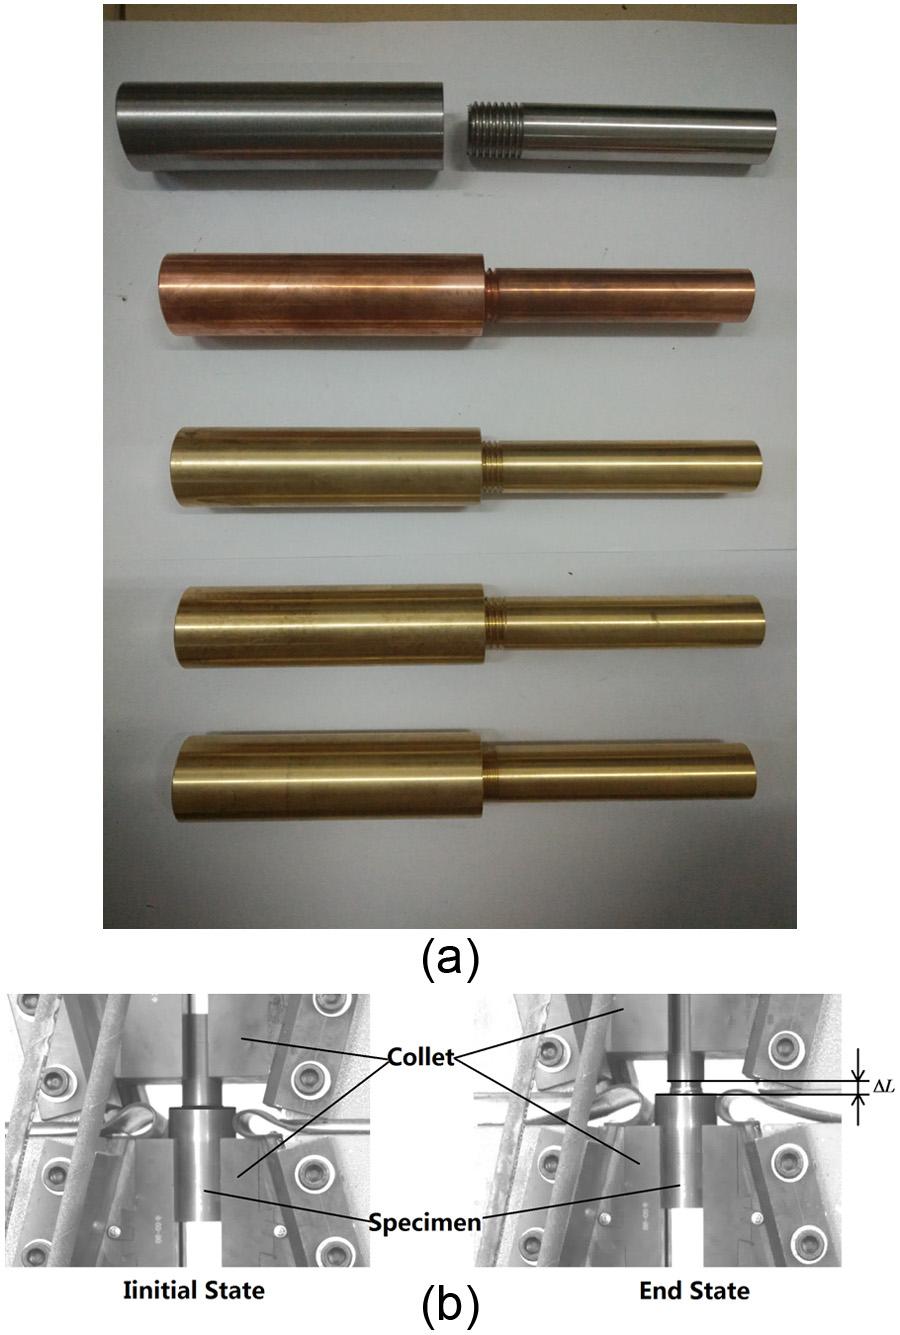 6 Advances in Mechanical Engineering Figure 7. Tensile tests for thread connection samples: (a) thread connection samples and (b) tensile test.